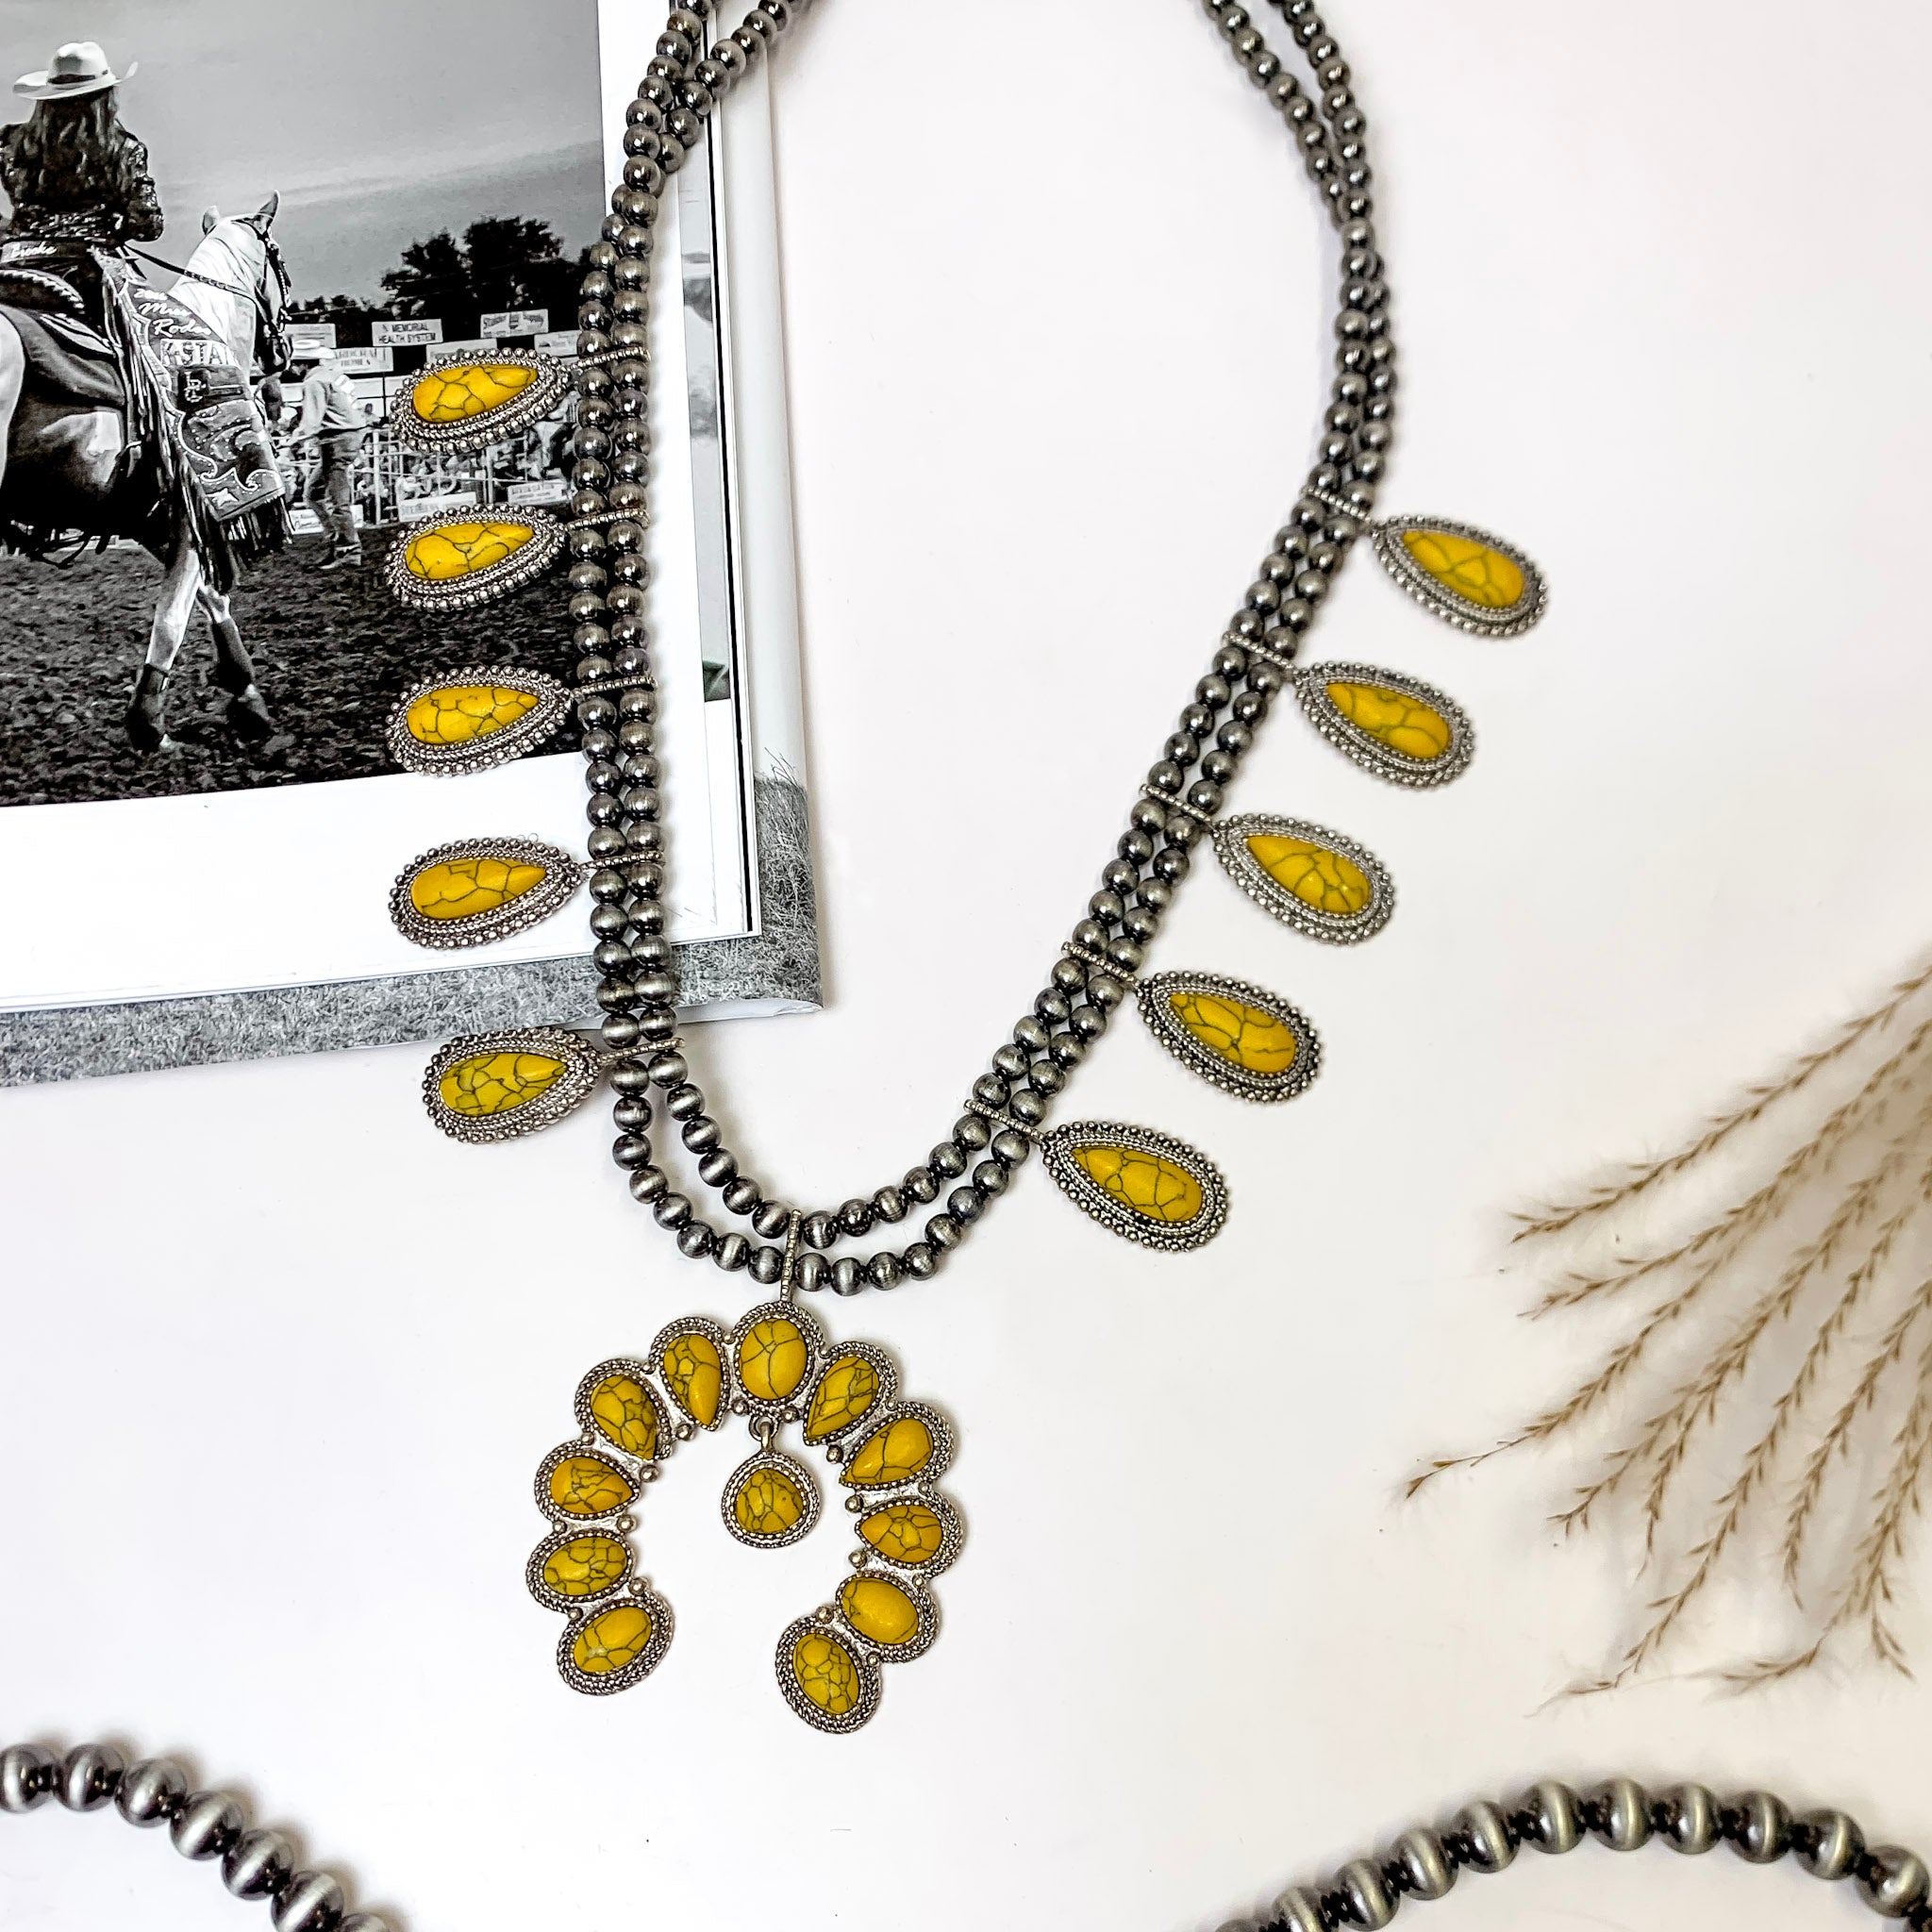 She's Gone Country Squash Blossom Necklace with Naja Pendant and Faux Stone Dangle in Mustard Yellow